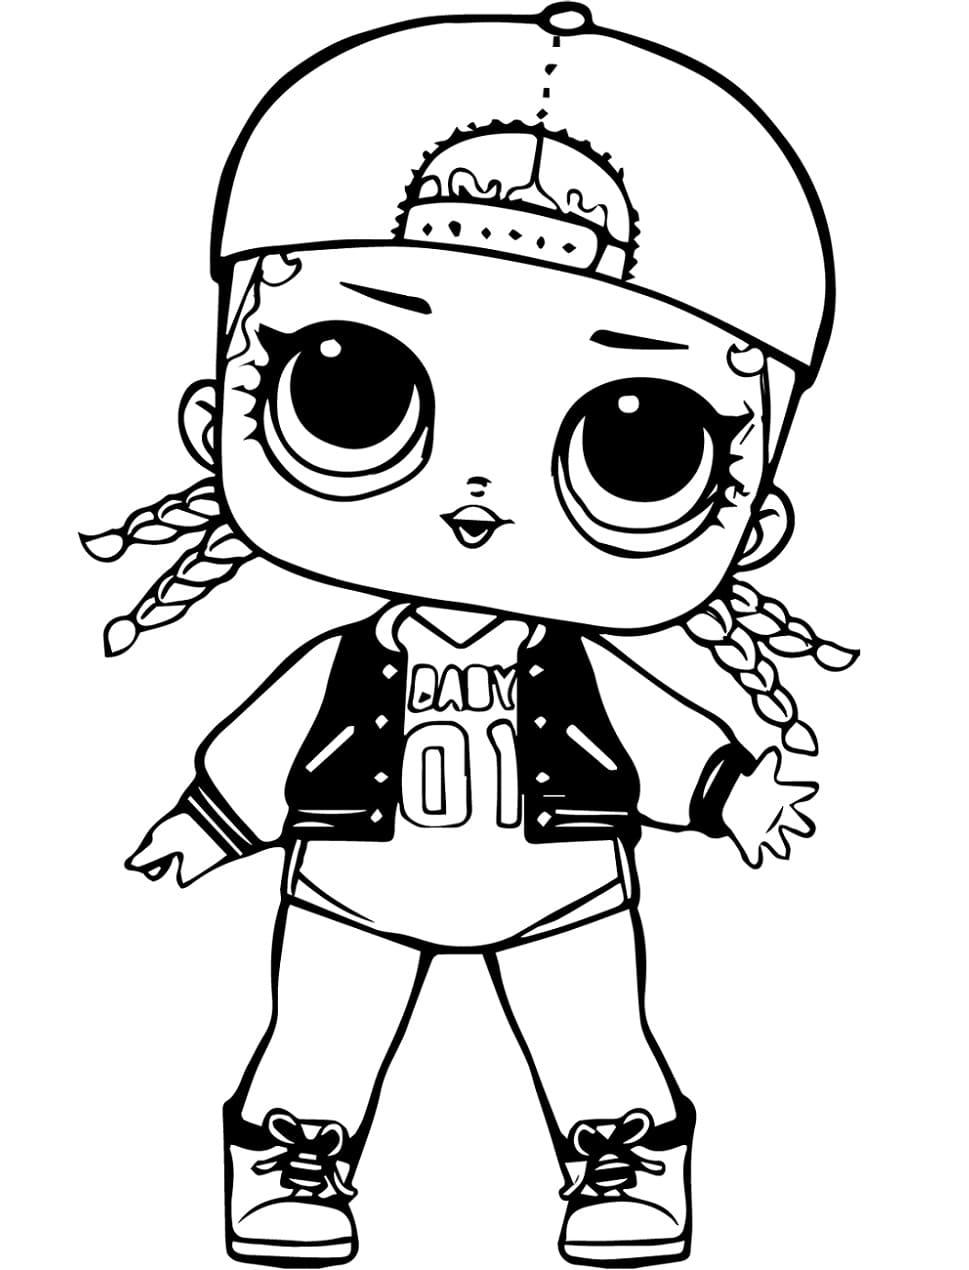 M.C. Swag Lol coloring page